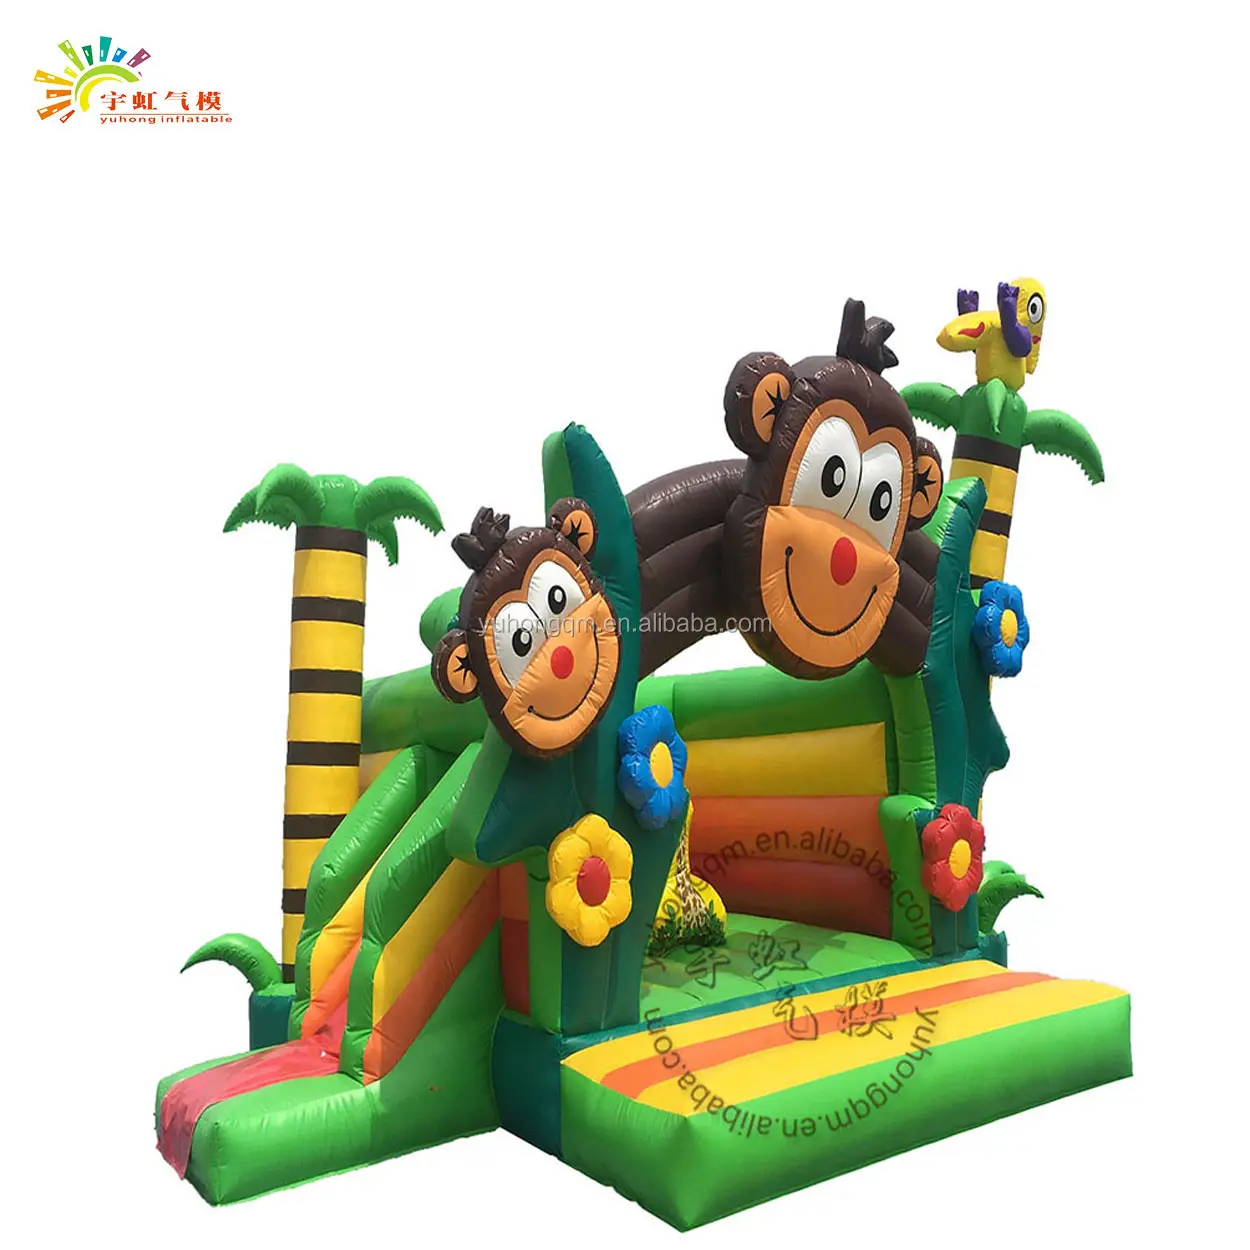 Customized cartoon style inflatable bouncer bouncy castles inflatable